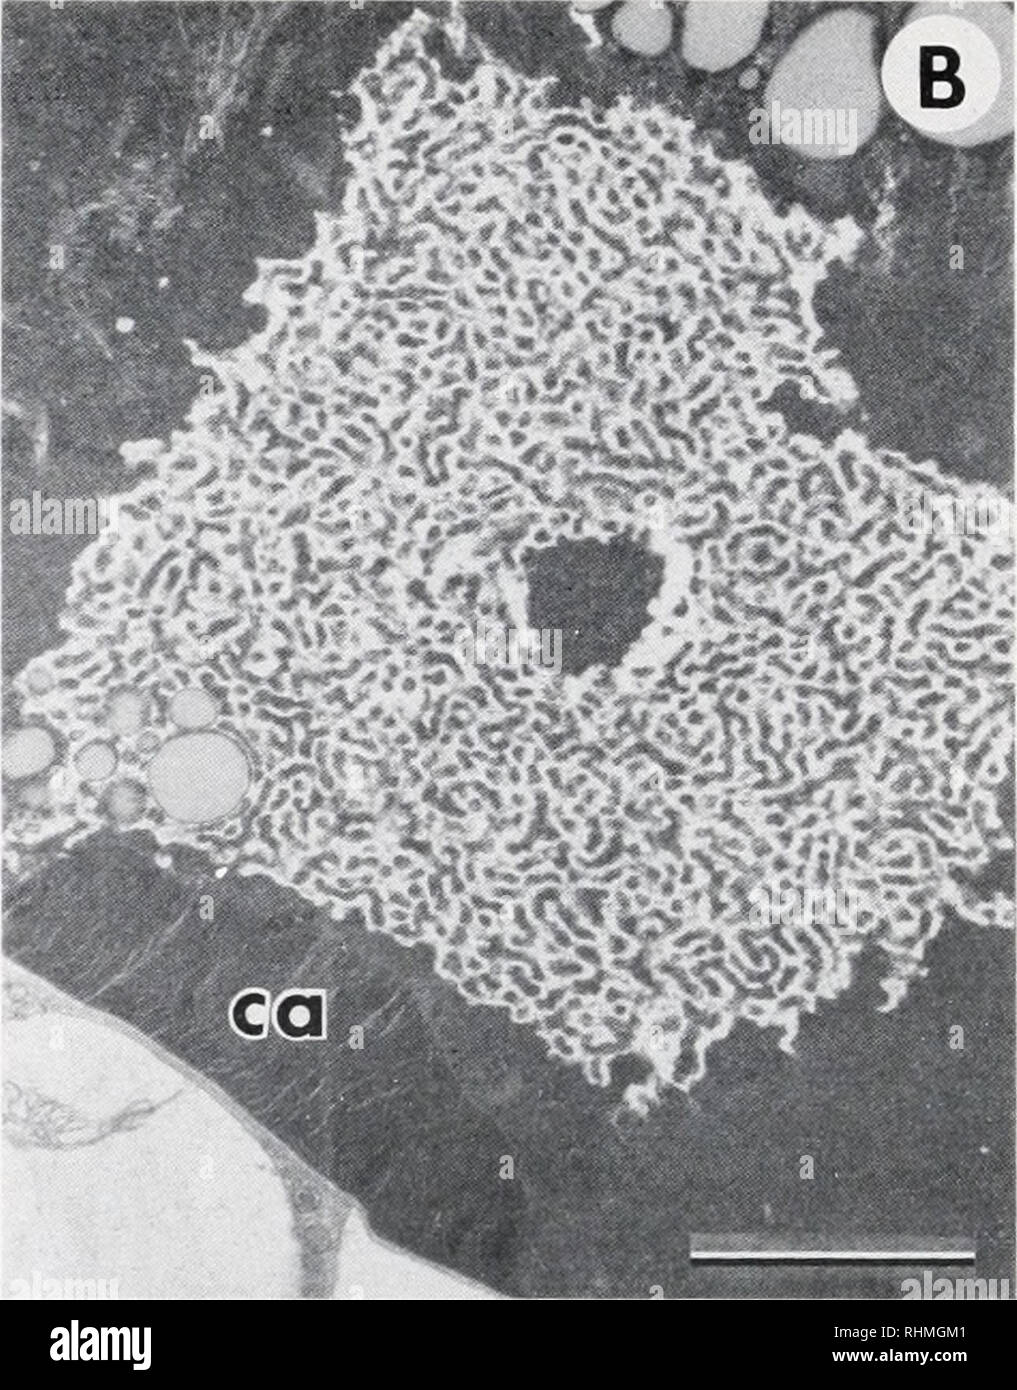 . The Biological bulletin. Biology; Zoology; Biology; Marine Biology. FIGURE 2. Two types of vacuole-enclosed granules present in trophochrome cells from Riftia pa- c/iyptila. A. Nondescript granules of uniform density, similar in appearance to mucigen granules. Scale bar = 1 micron. B. Electron-dense granule containing crystalline arrays (ca) of material that is proteinaceous in appearance. Scale bar = 2 microns. outward from the center of the bacterium labeled &quot;b&quot;) the bacterial cell envelope, the peribacterial membrane, and immediately adjacent, a nuclear envelope. At the very cen Stock Photo